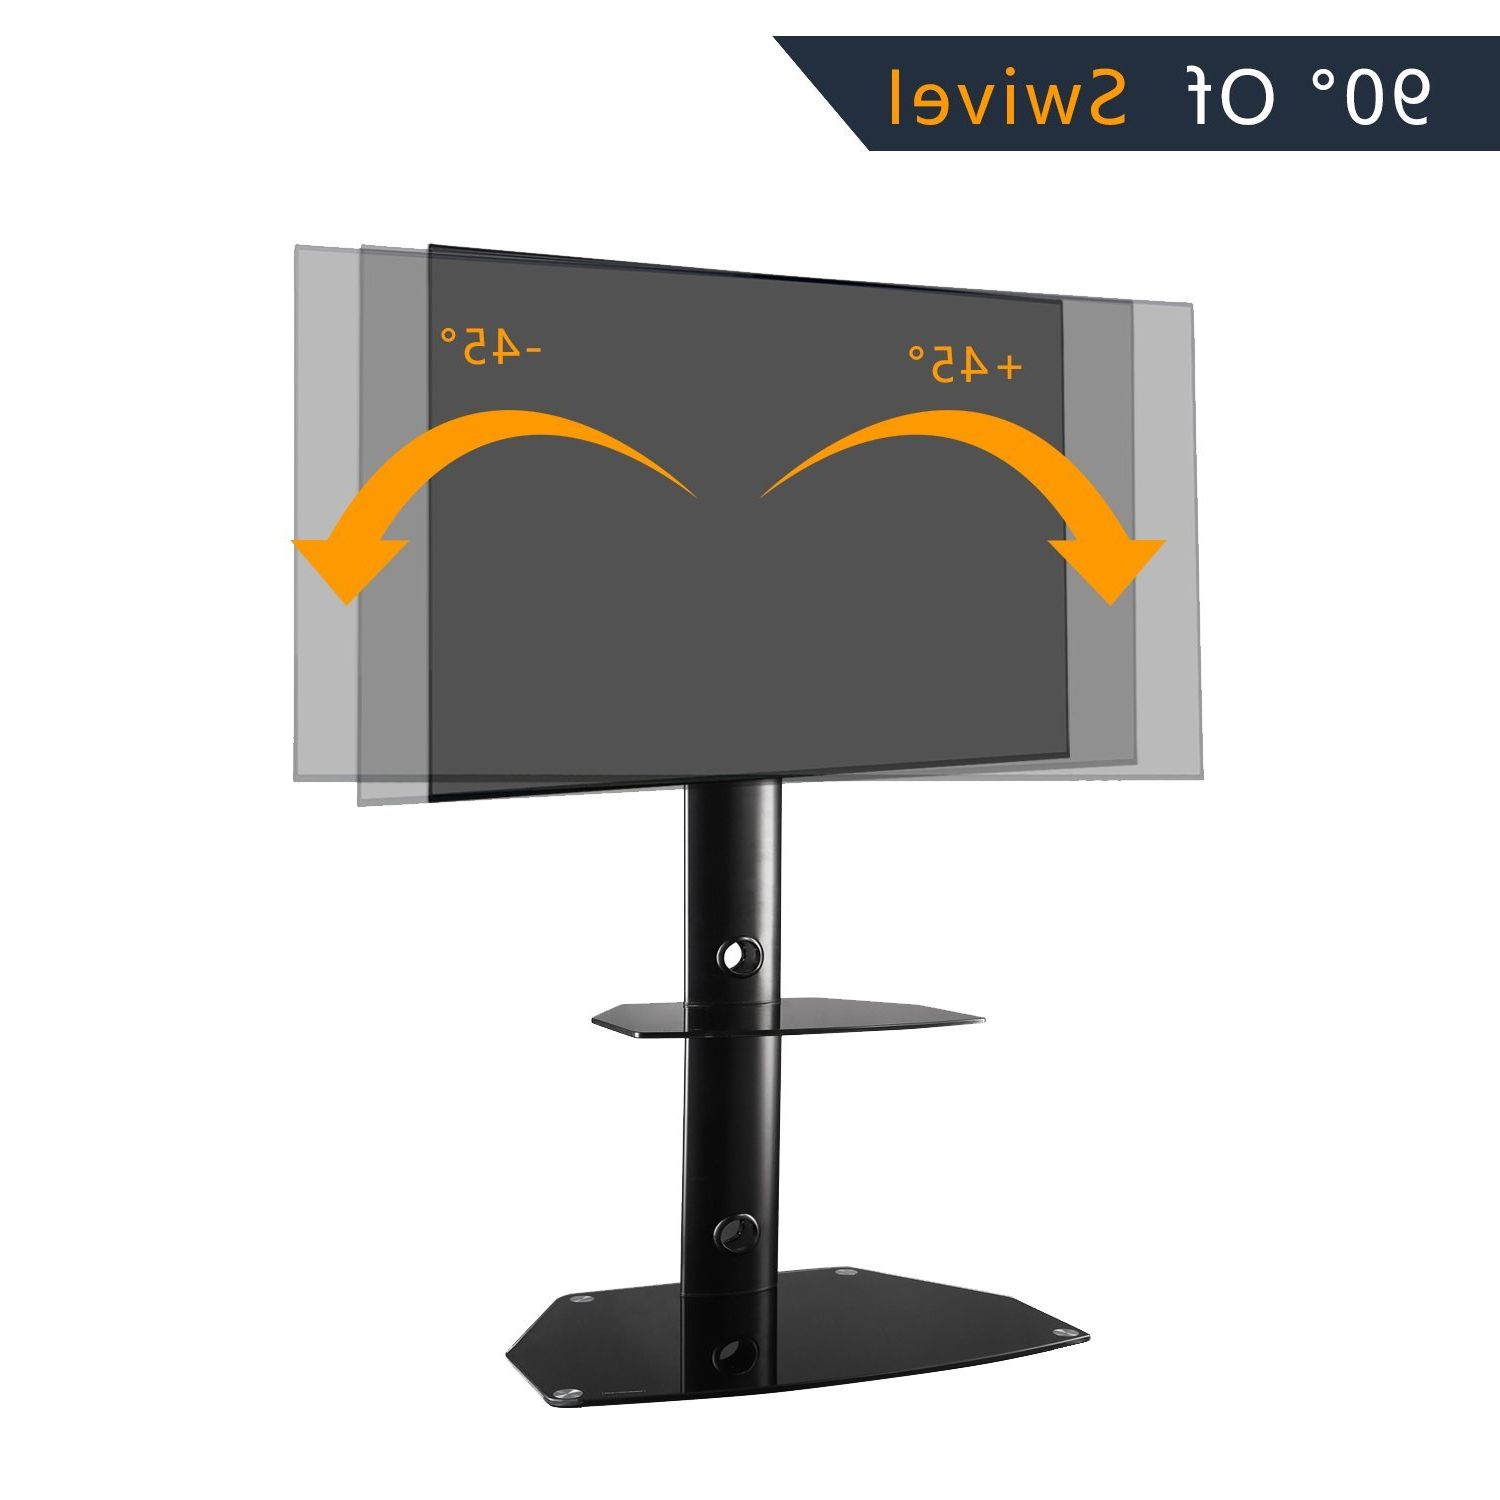 Famous Floor Tv Stands With Swivel Mount And Tempered Glass Shelves For Storage Inside Rfiver Tavr Furniture Modern Black Swivel Mount Floor Tv (View 7 of 10)